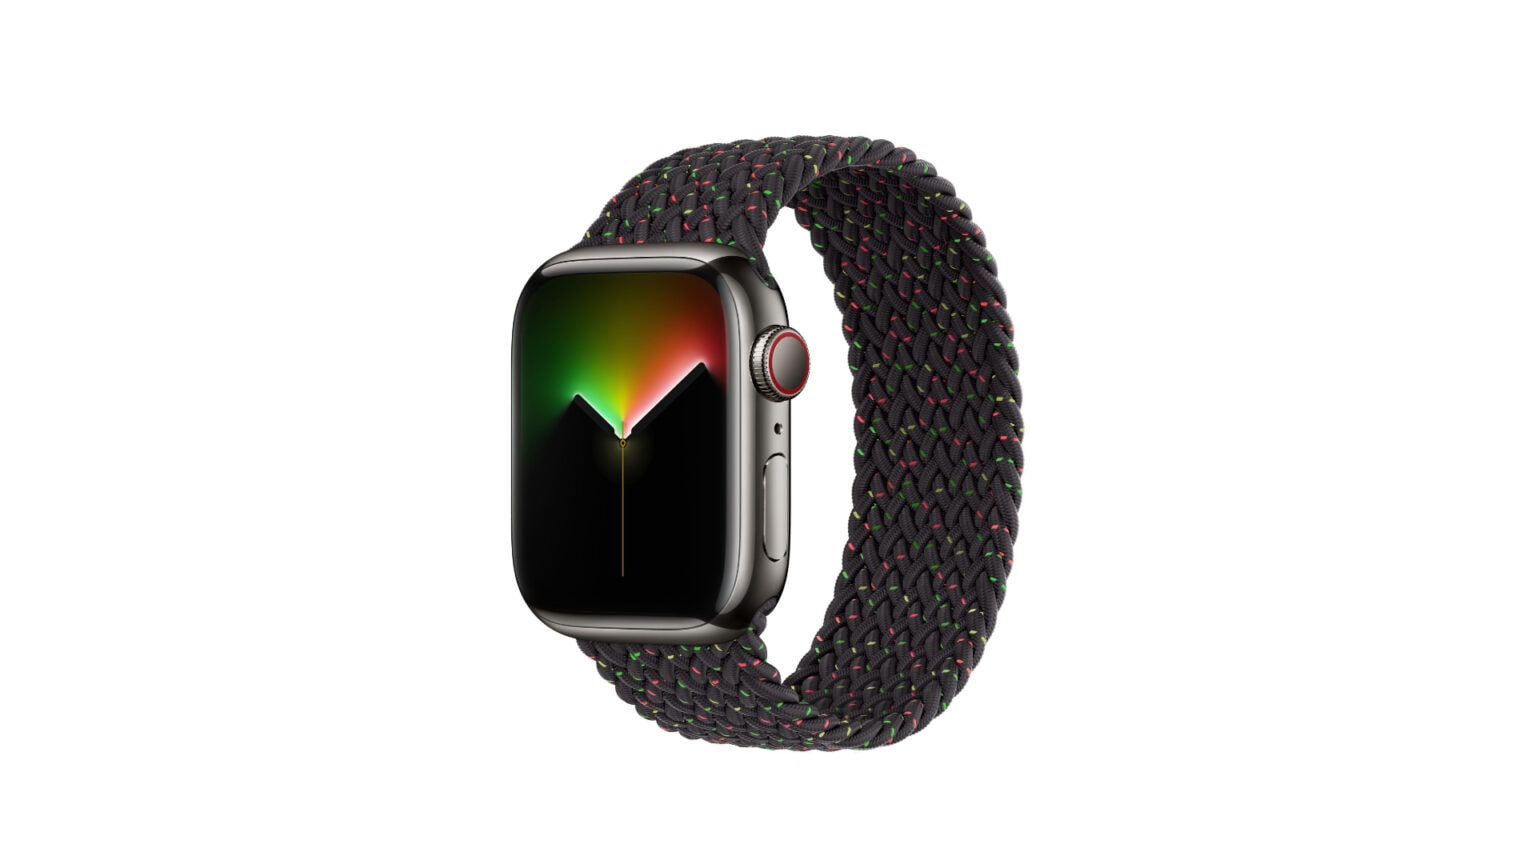 Apple Watch gets new band and face for Black History Month